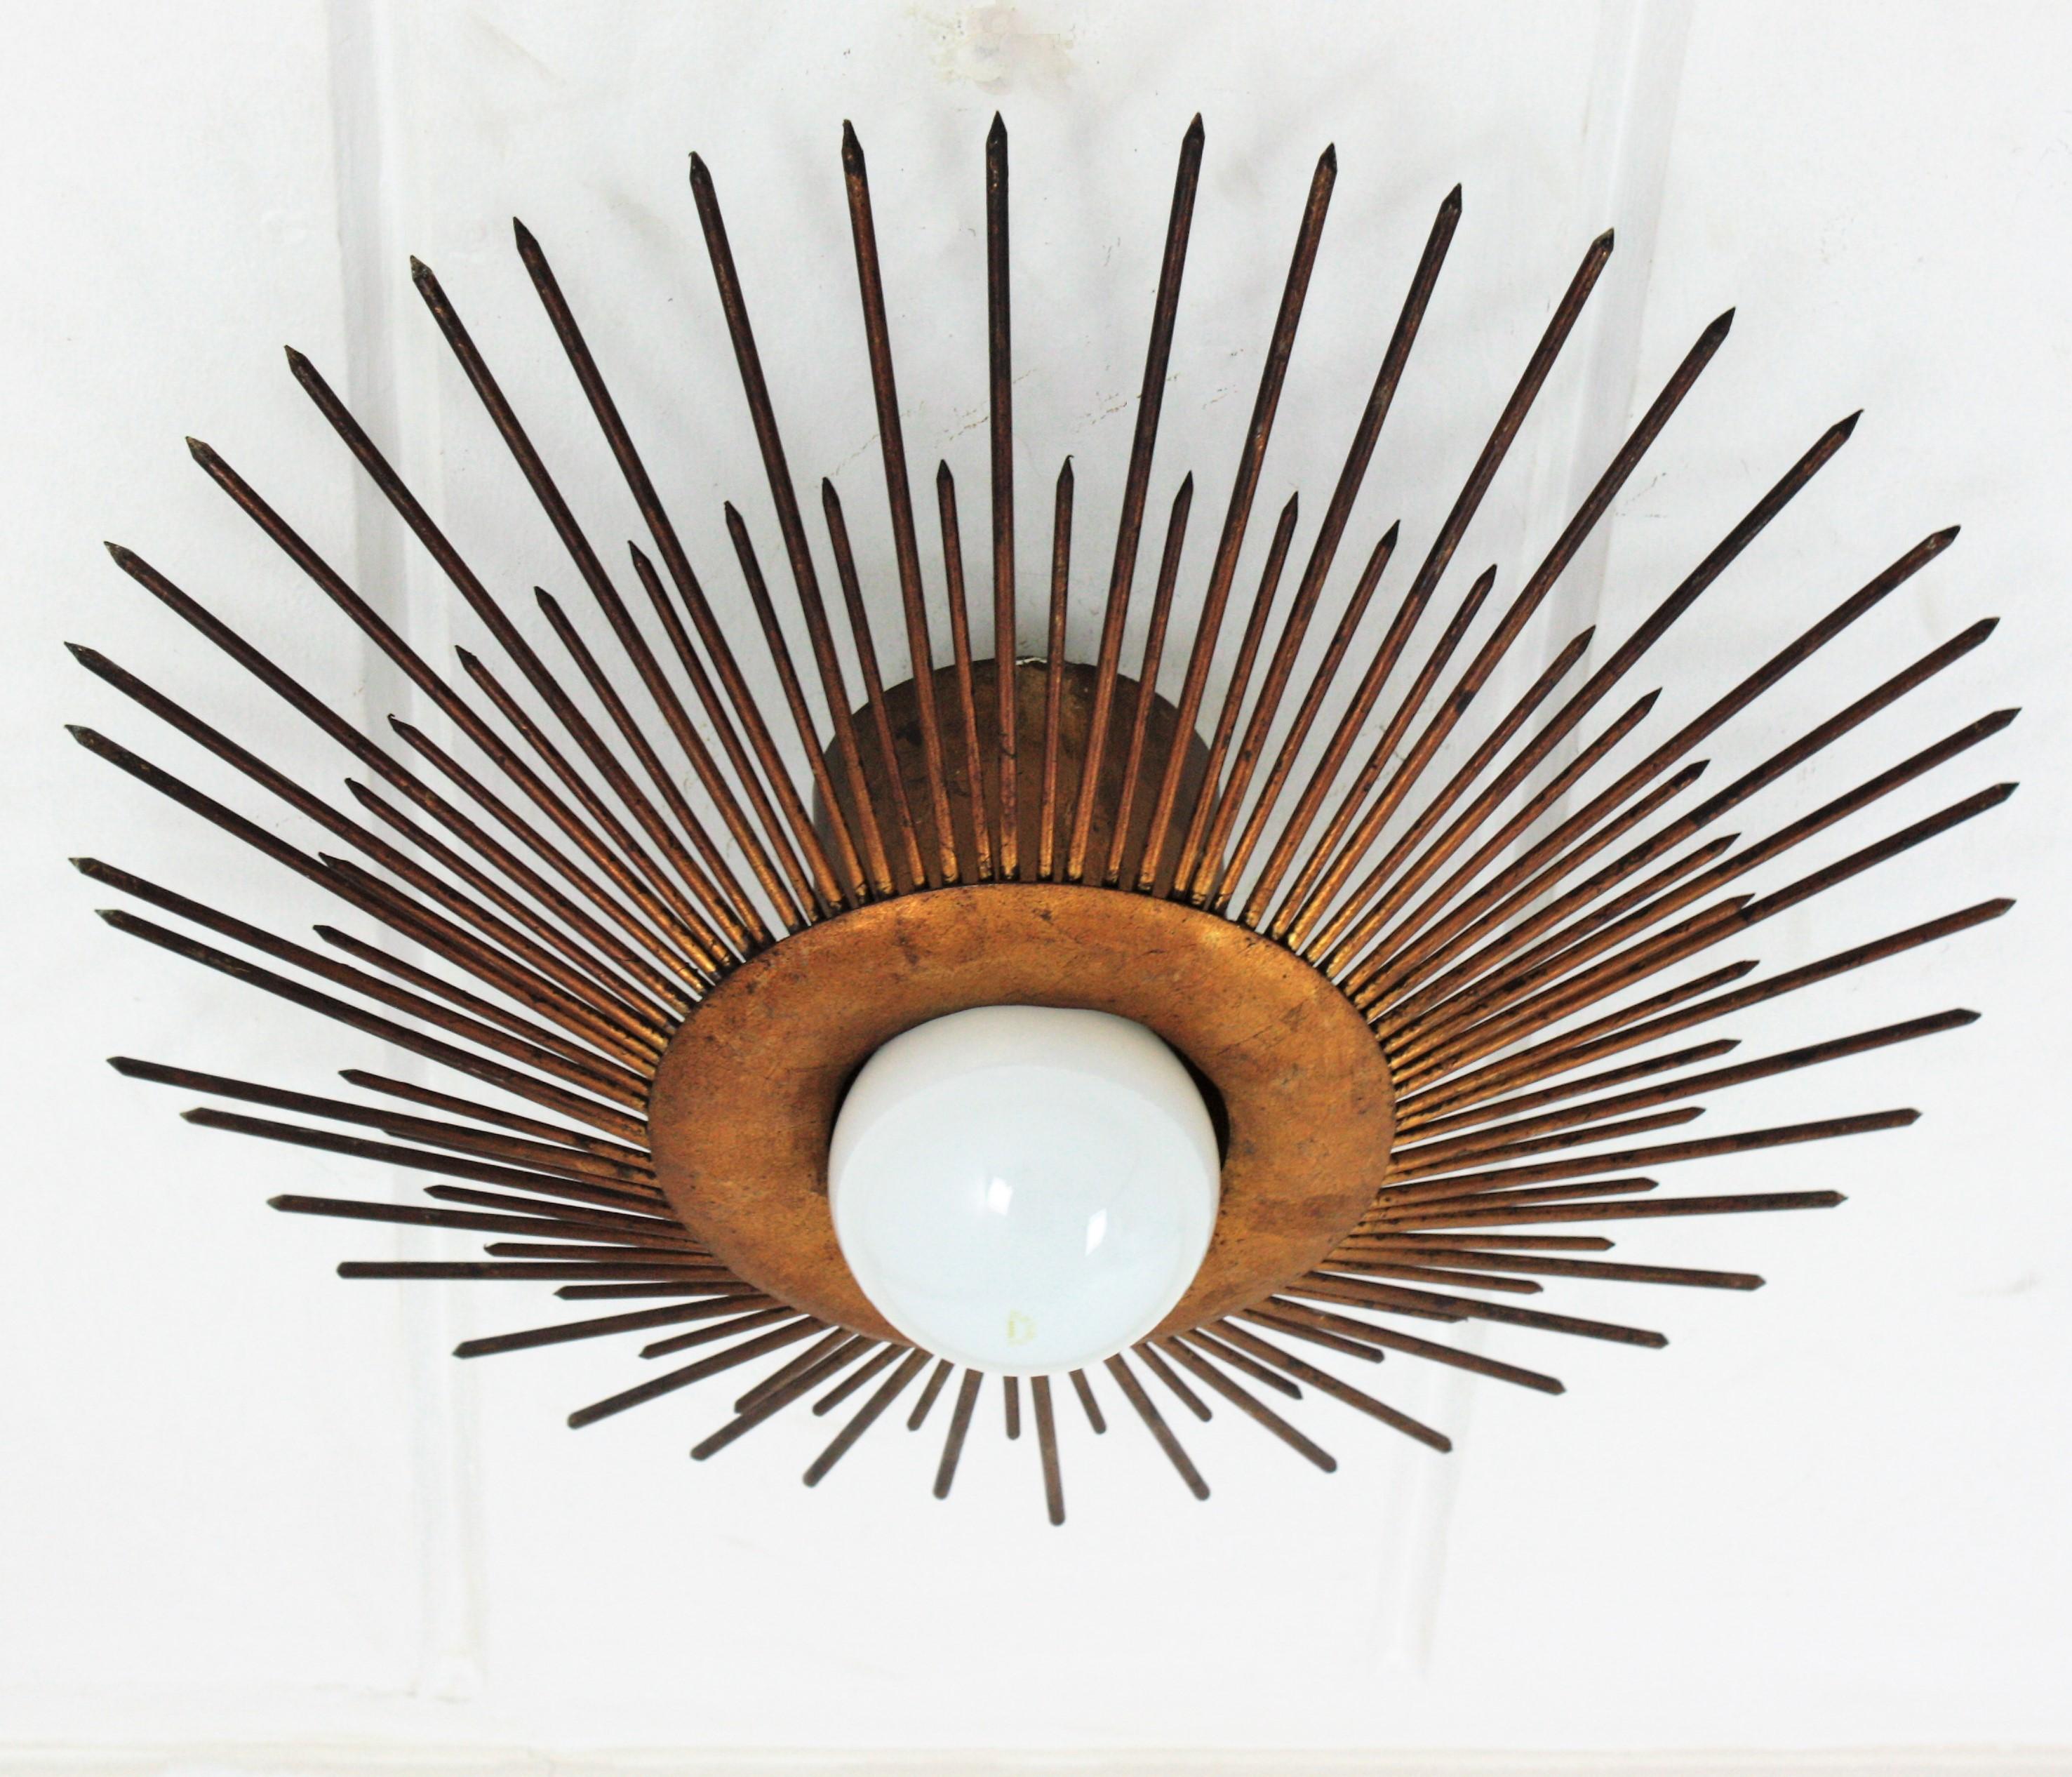 Large sunburst light fixture in gold leaf gilt iron, France, 1930s-1940s
French wrought iron bronze gilt large sunburst flush mount or pendant with nails or spikes frame.
A highly decorative sunburst ceiling light fixture with frontal light